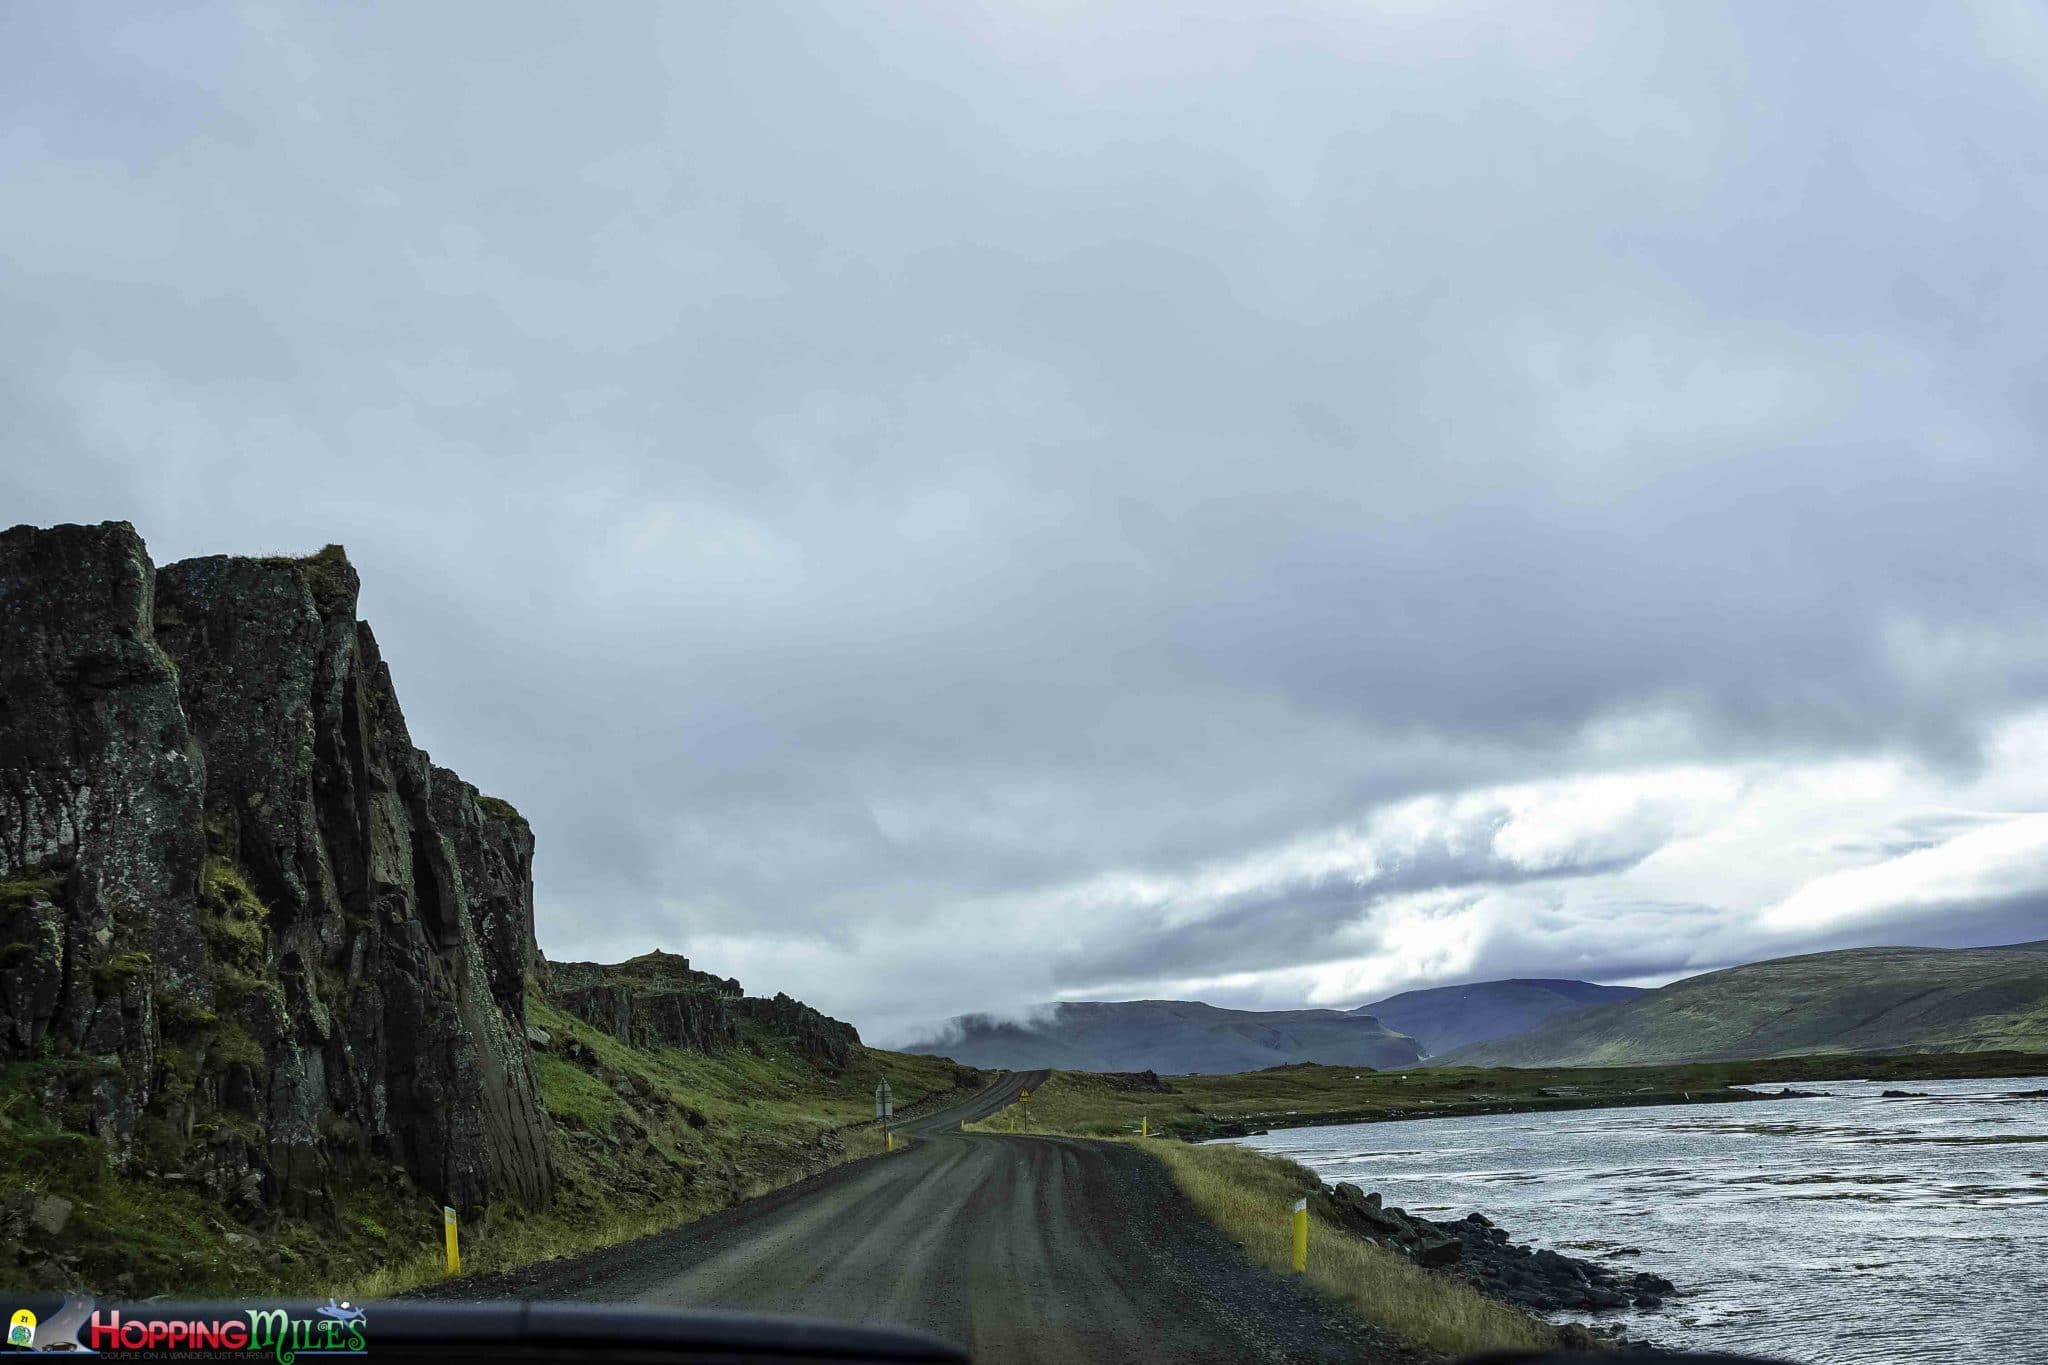 What car to rent in Iceland - 2x2 or 4x4? Automatic or manual?